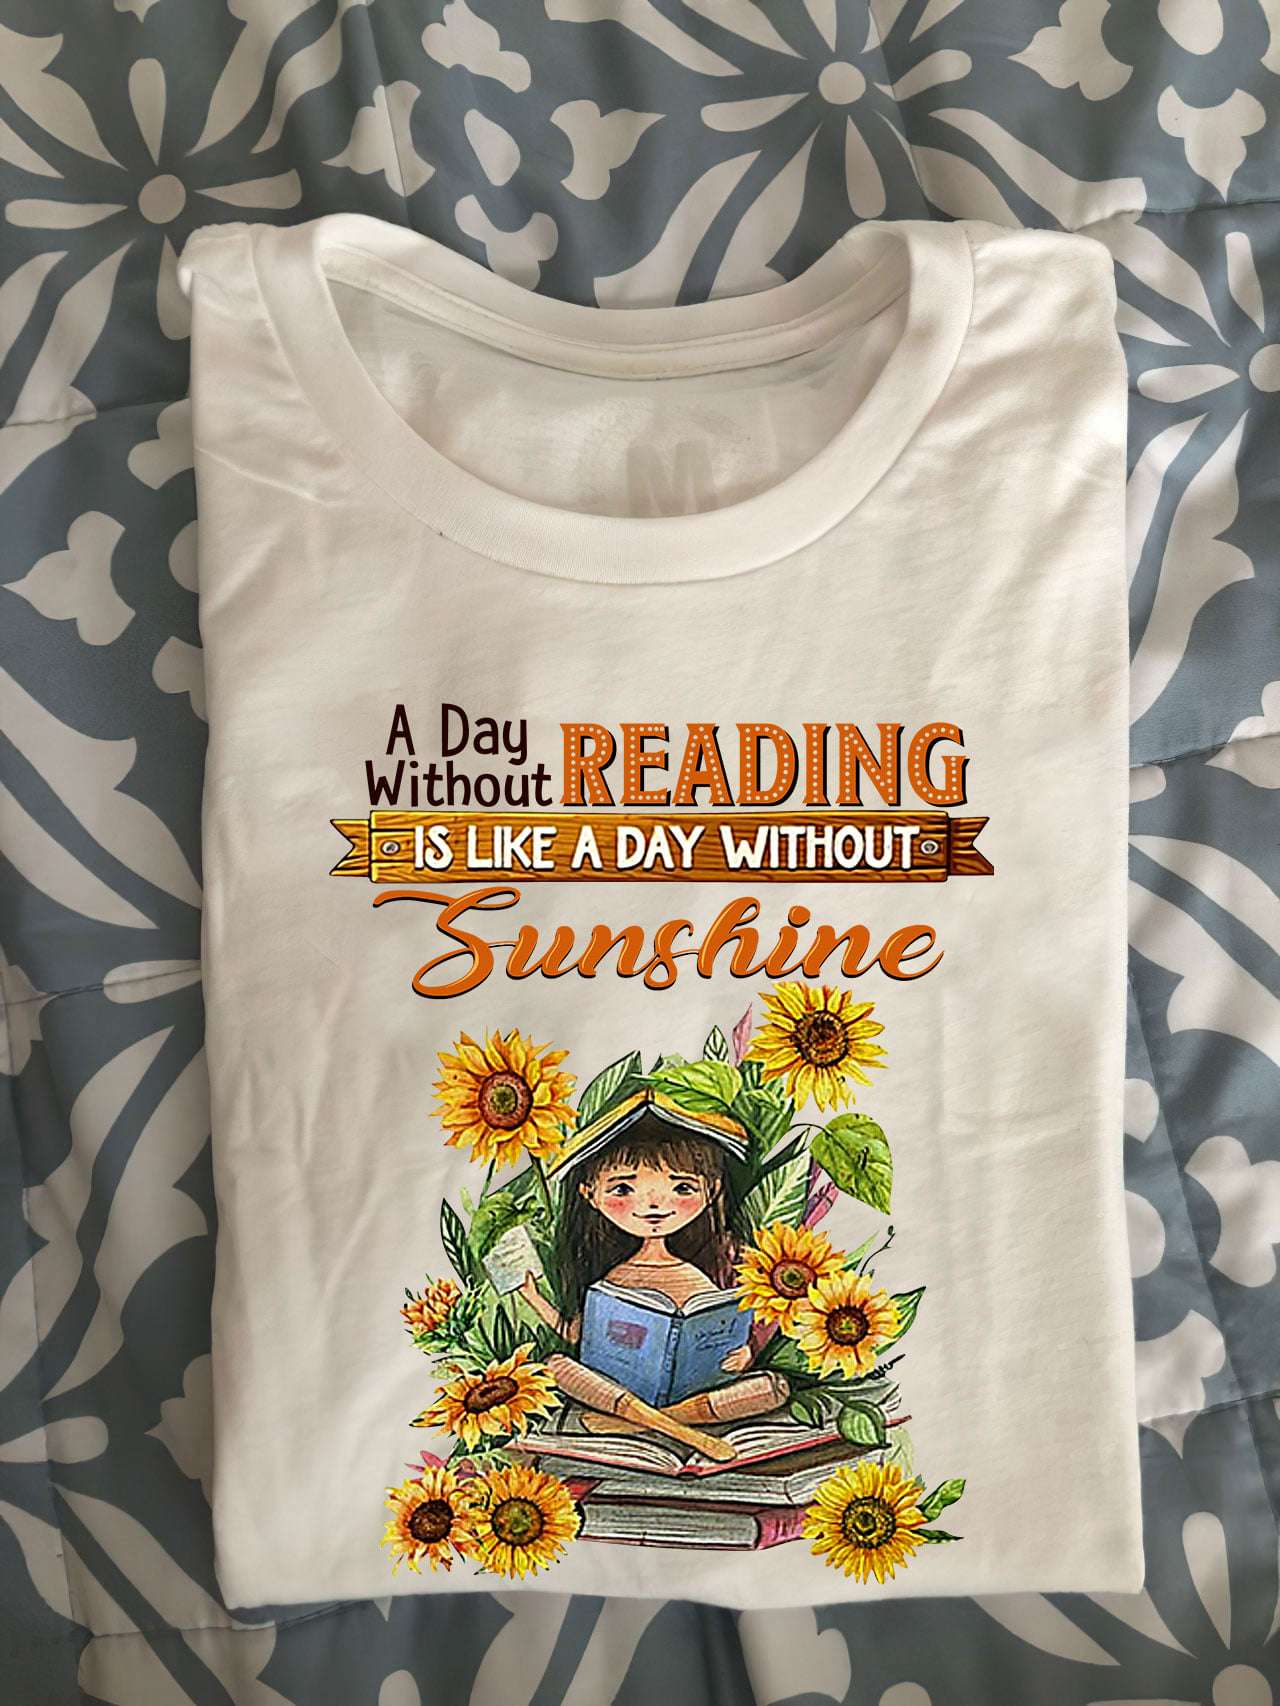 A day without reading is like a day without sunshine - Girl reading book